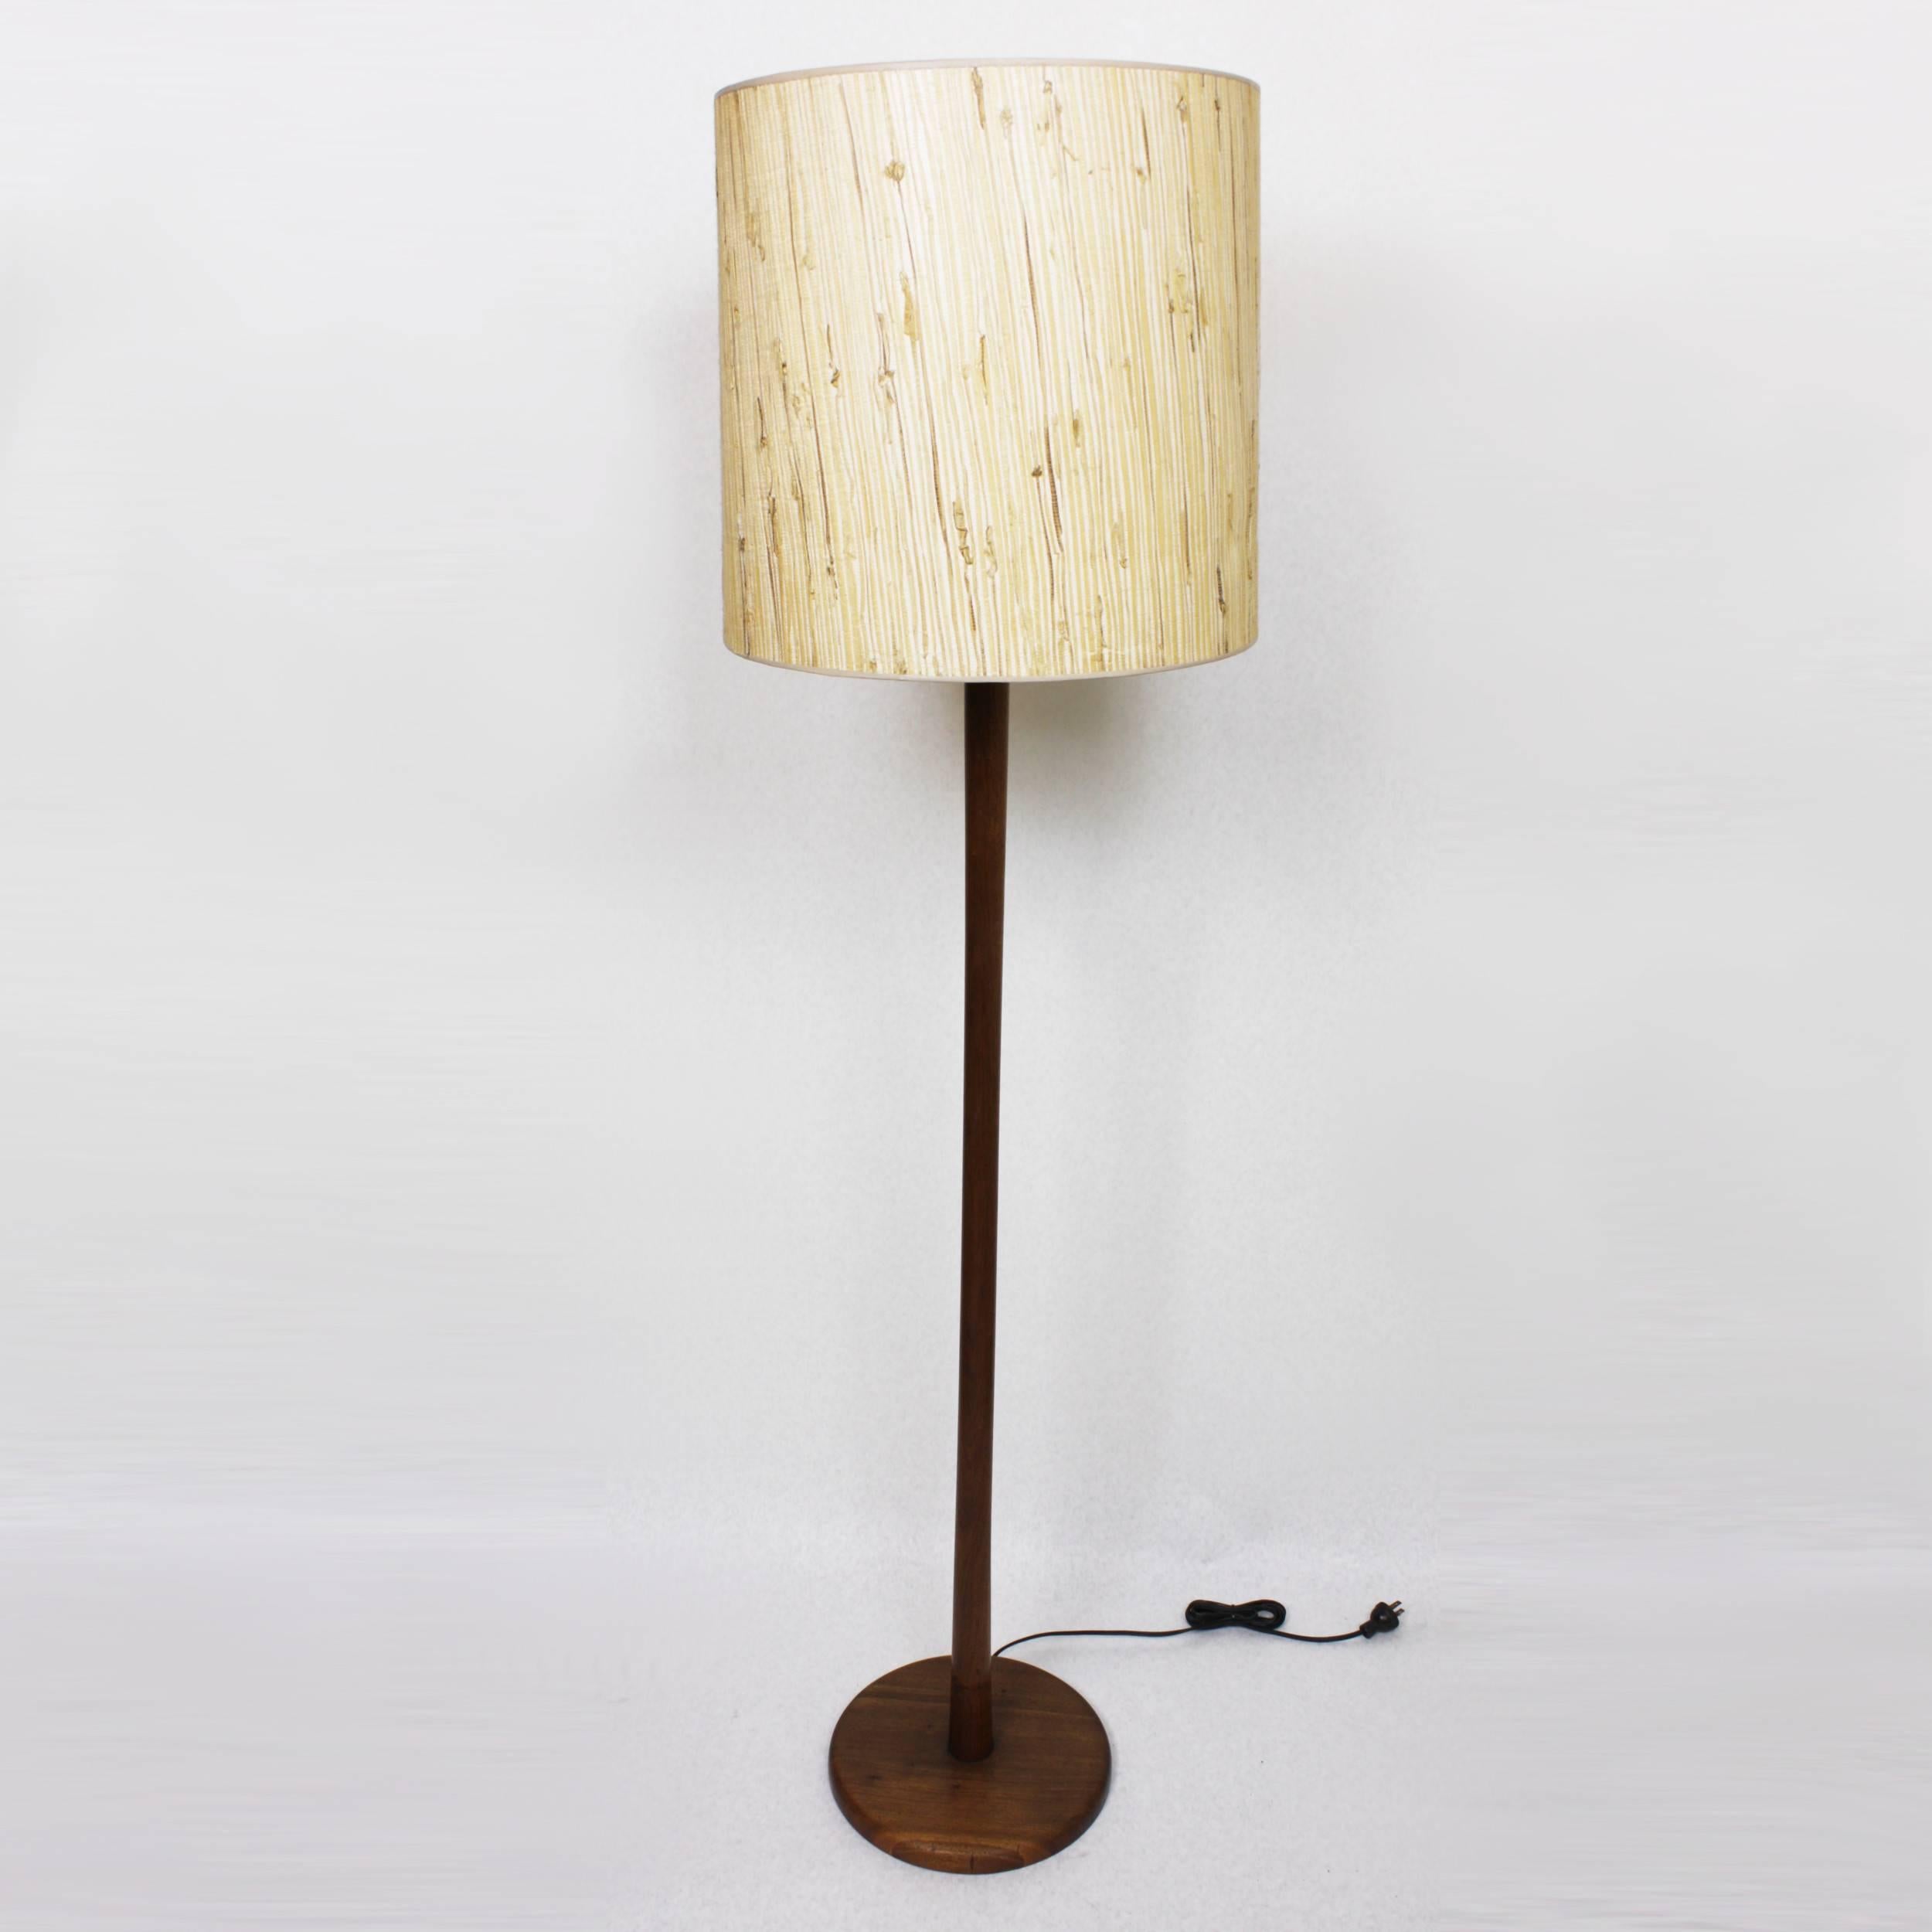 This wonderful model W-4 floor lamp was designed by Gordon & Jane Martz and manufactured at their Marshall Studios facility in Veedersburg, IN. Lamp features solid walnut construction with original 